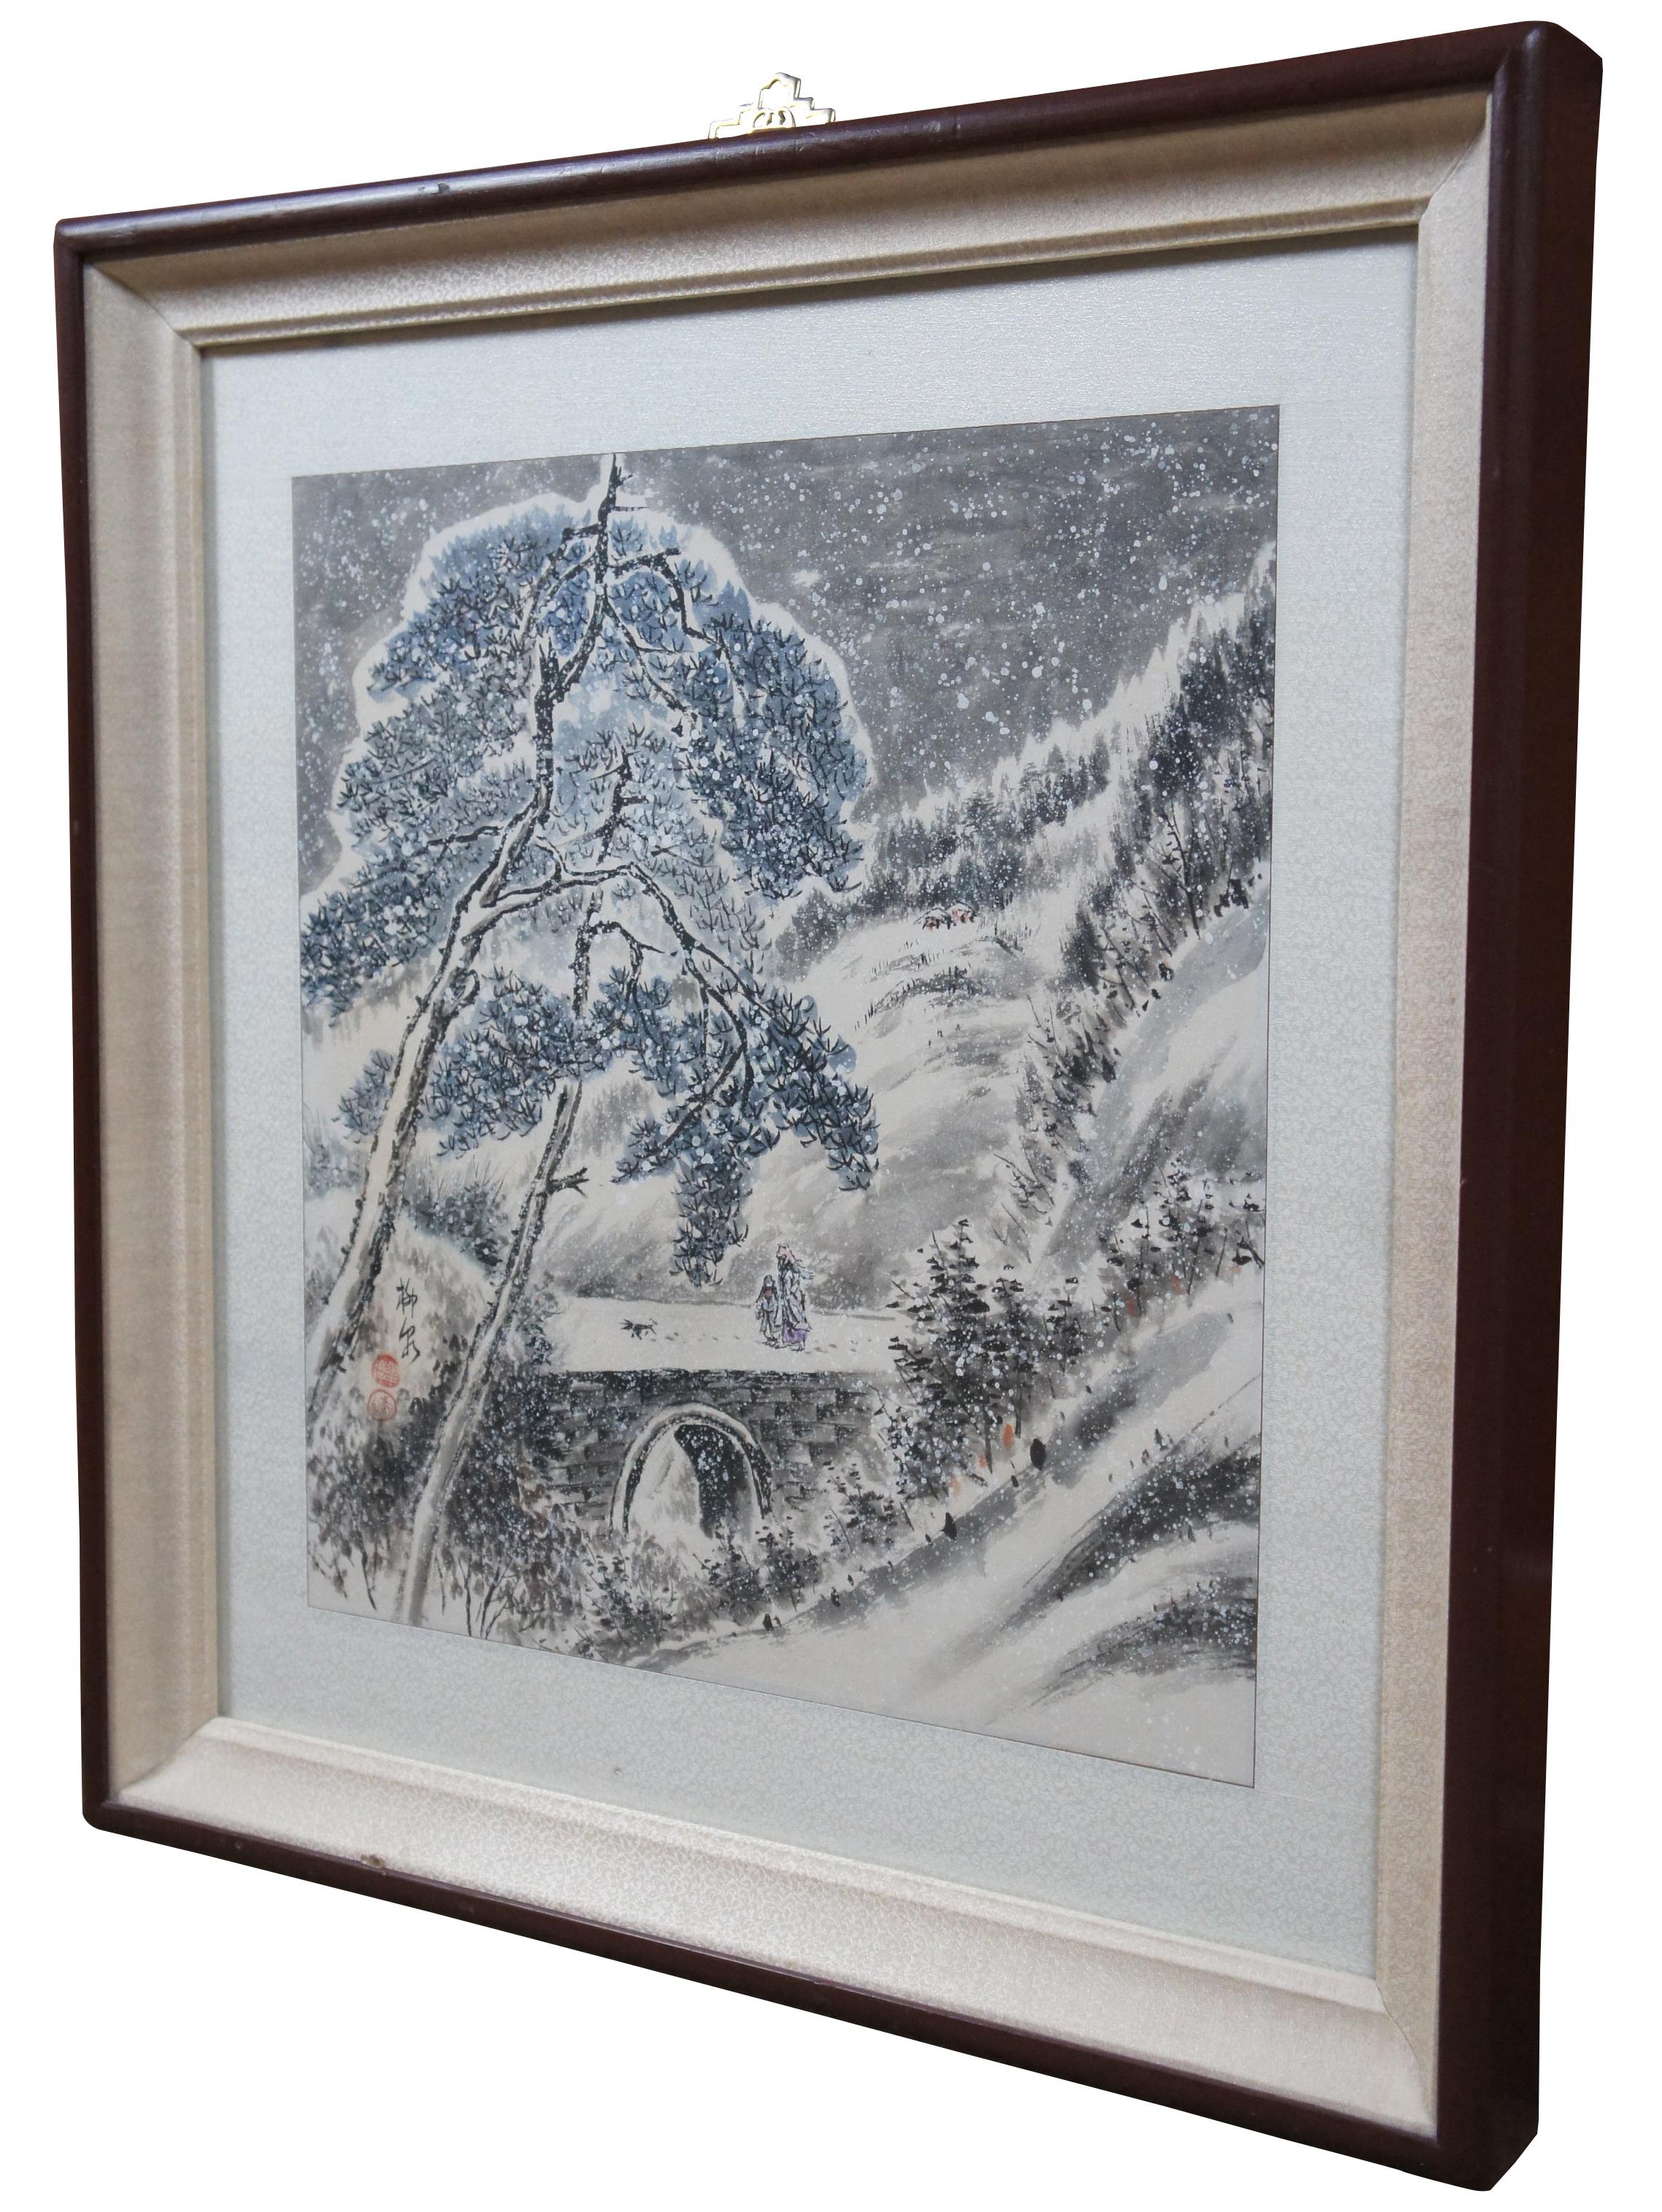 1971 Huaqing Kim (Liu Quan) watercolor painting showing a winter mountain landscape of the Dongkya Range of the Himalayas between China's Yadong County in Tibe. Features a pair of figures crossing a stone bridge, walking their dog, in a snowstorm